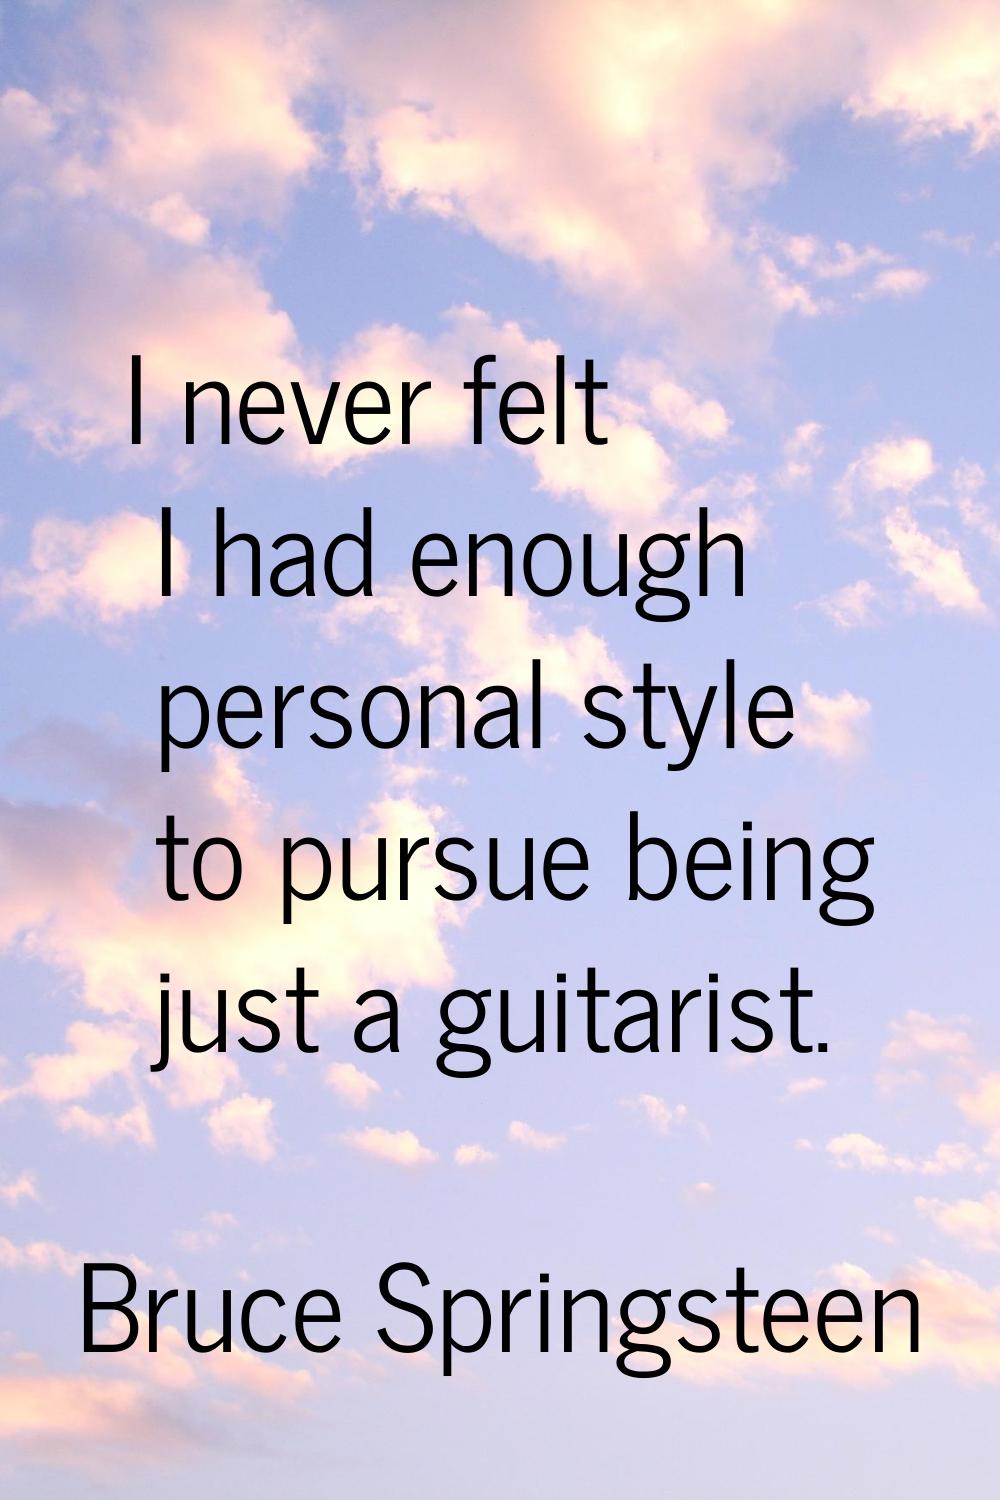 I never felt I had enough personal style to pursue being just a guitarist.